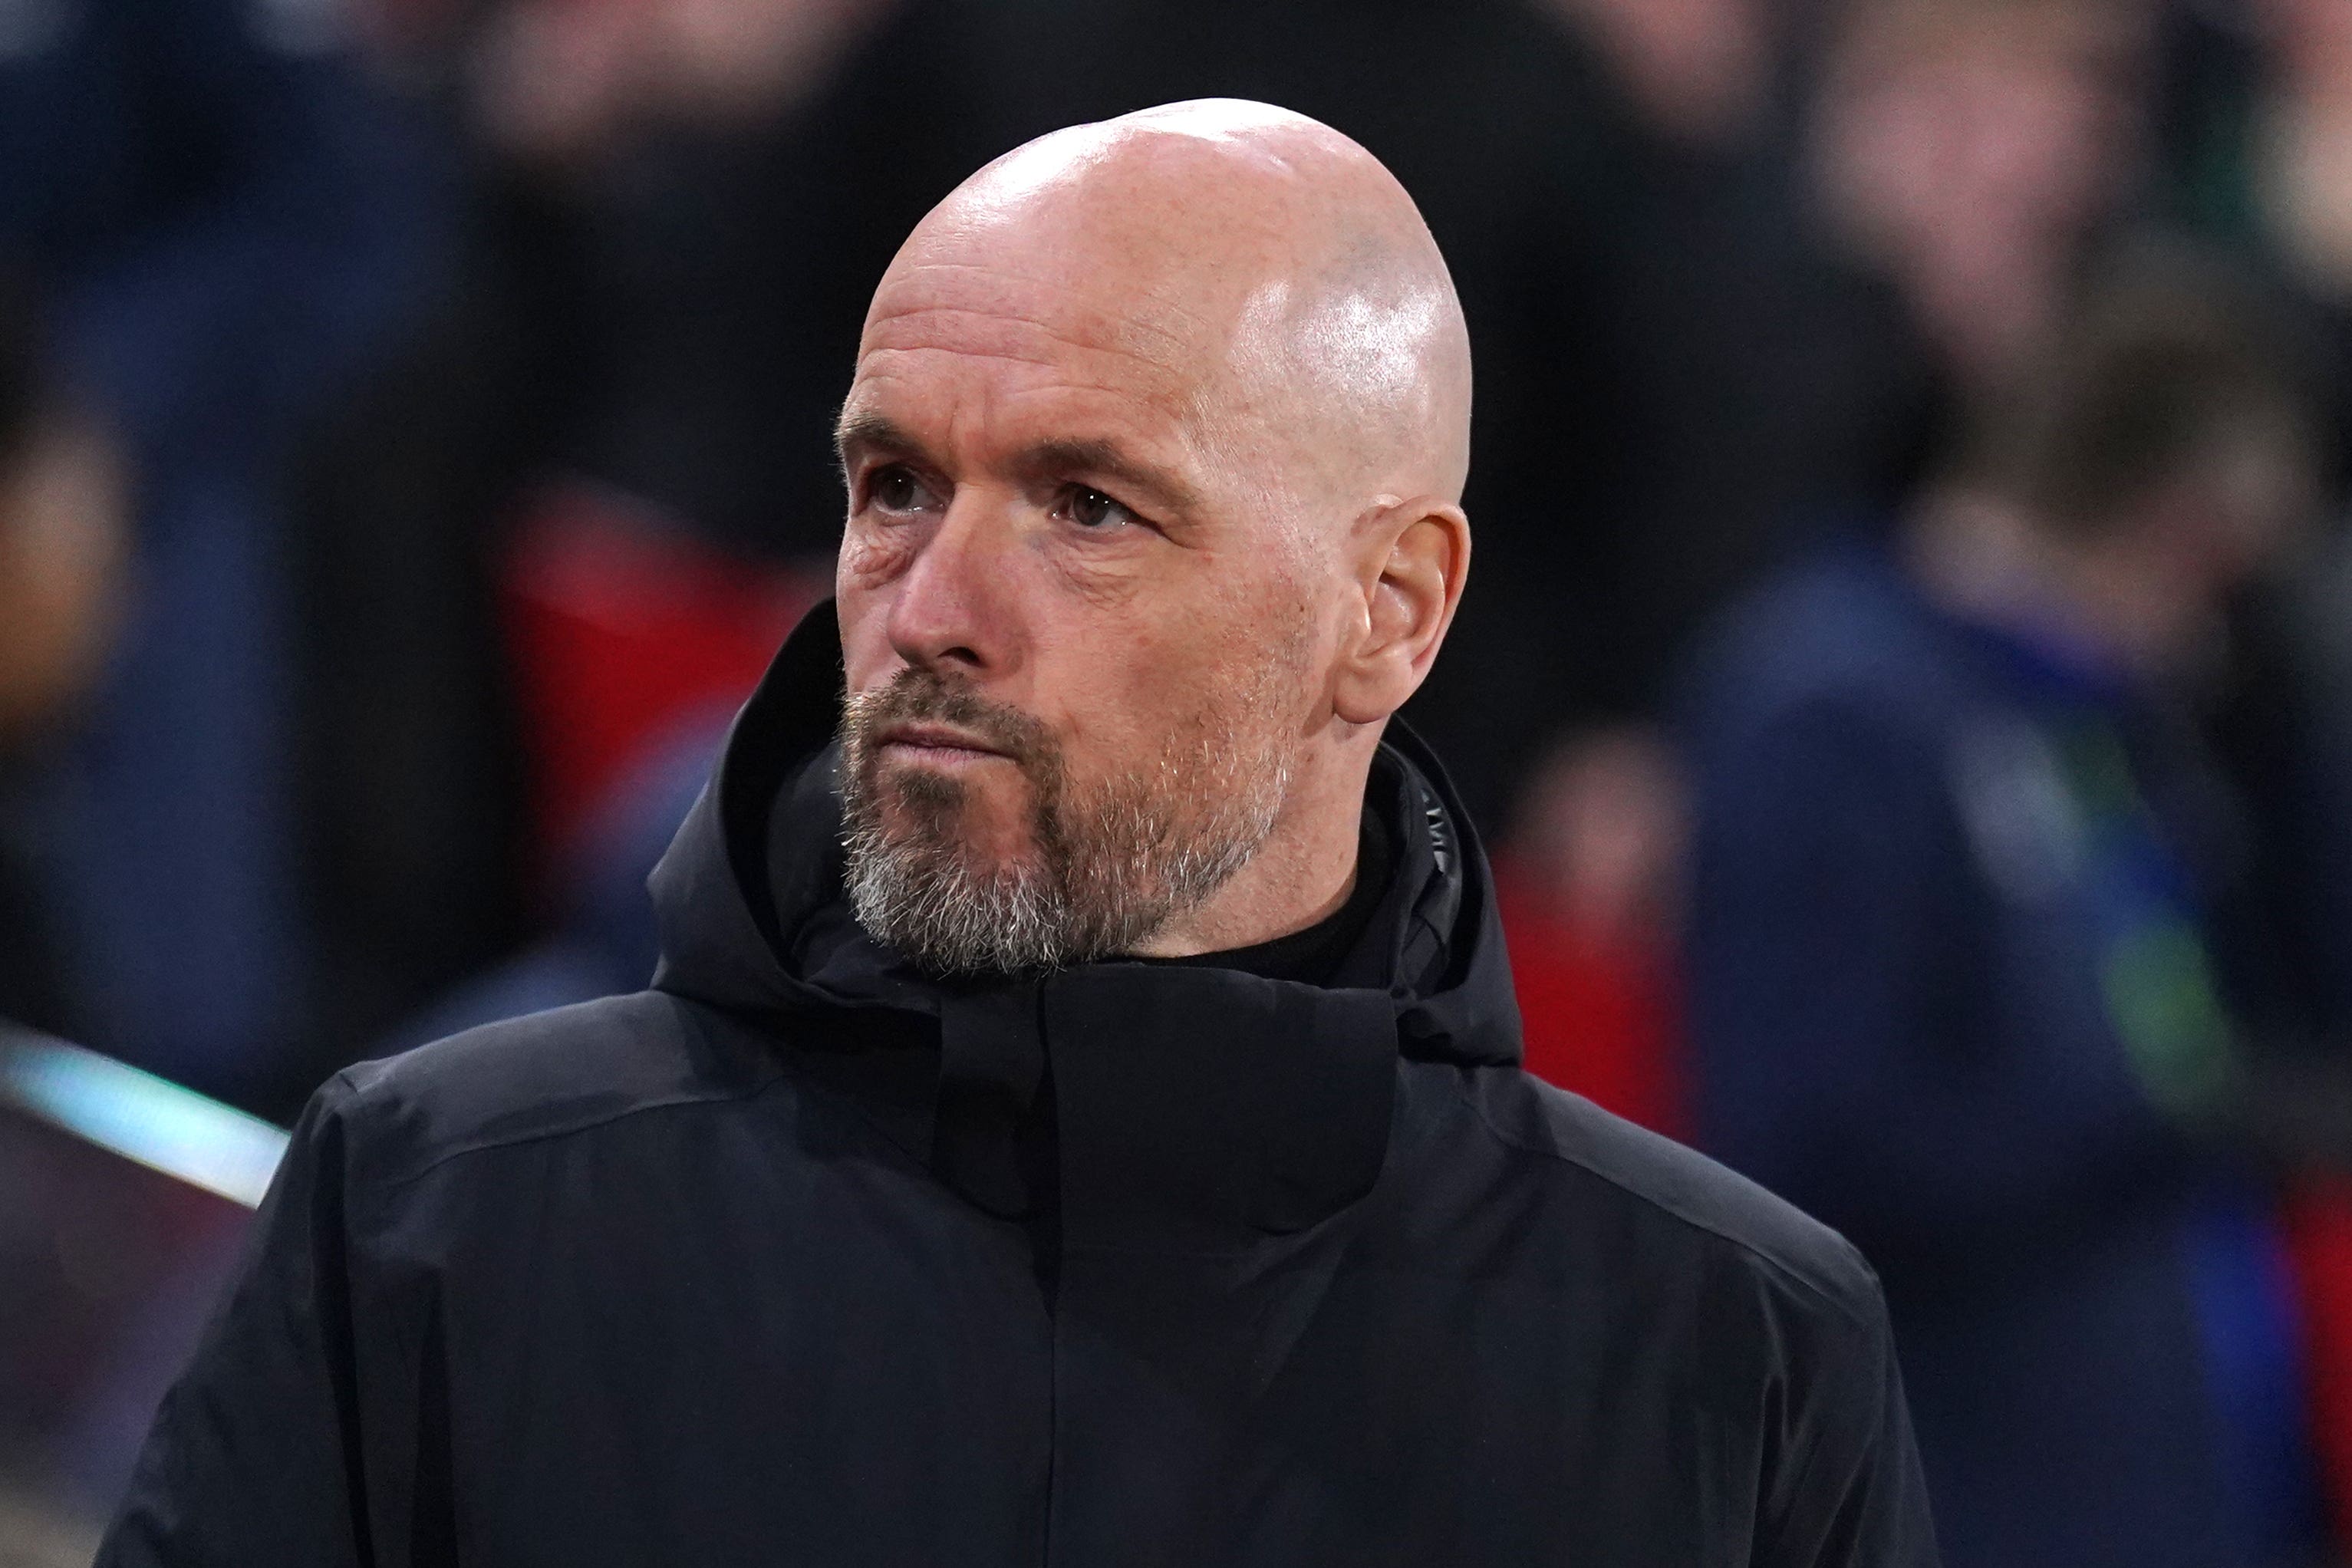 Erik ten Hag's long-term future at Manchester United largely depends on the result against Liverpool this weekend.